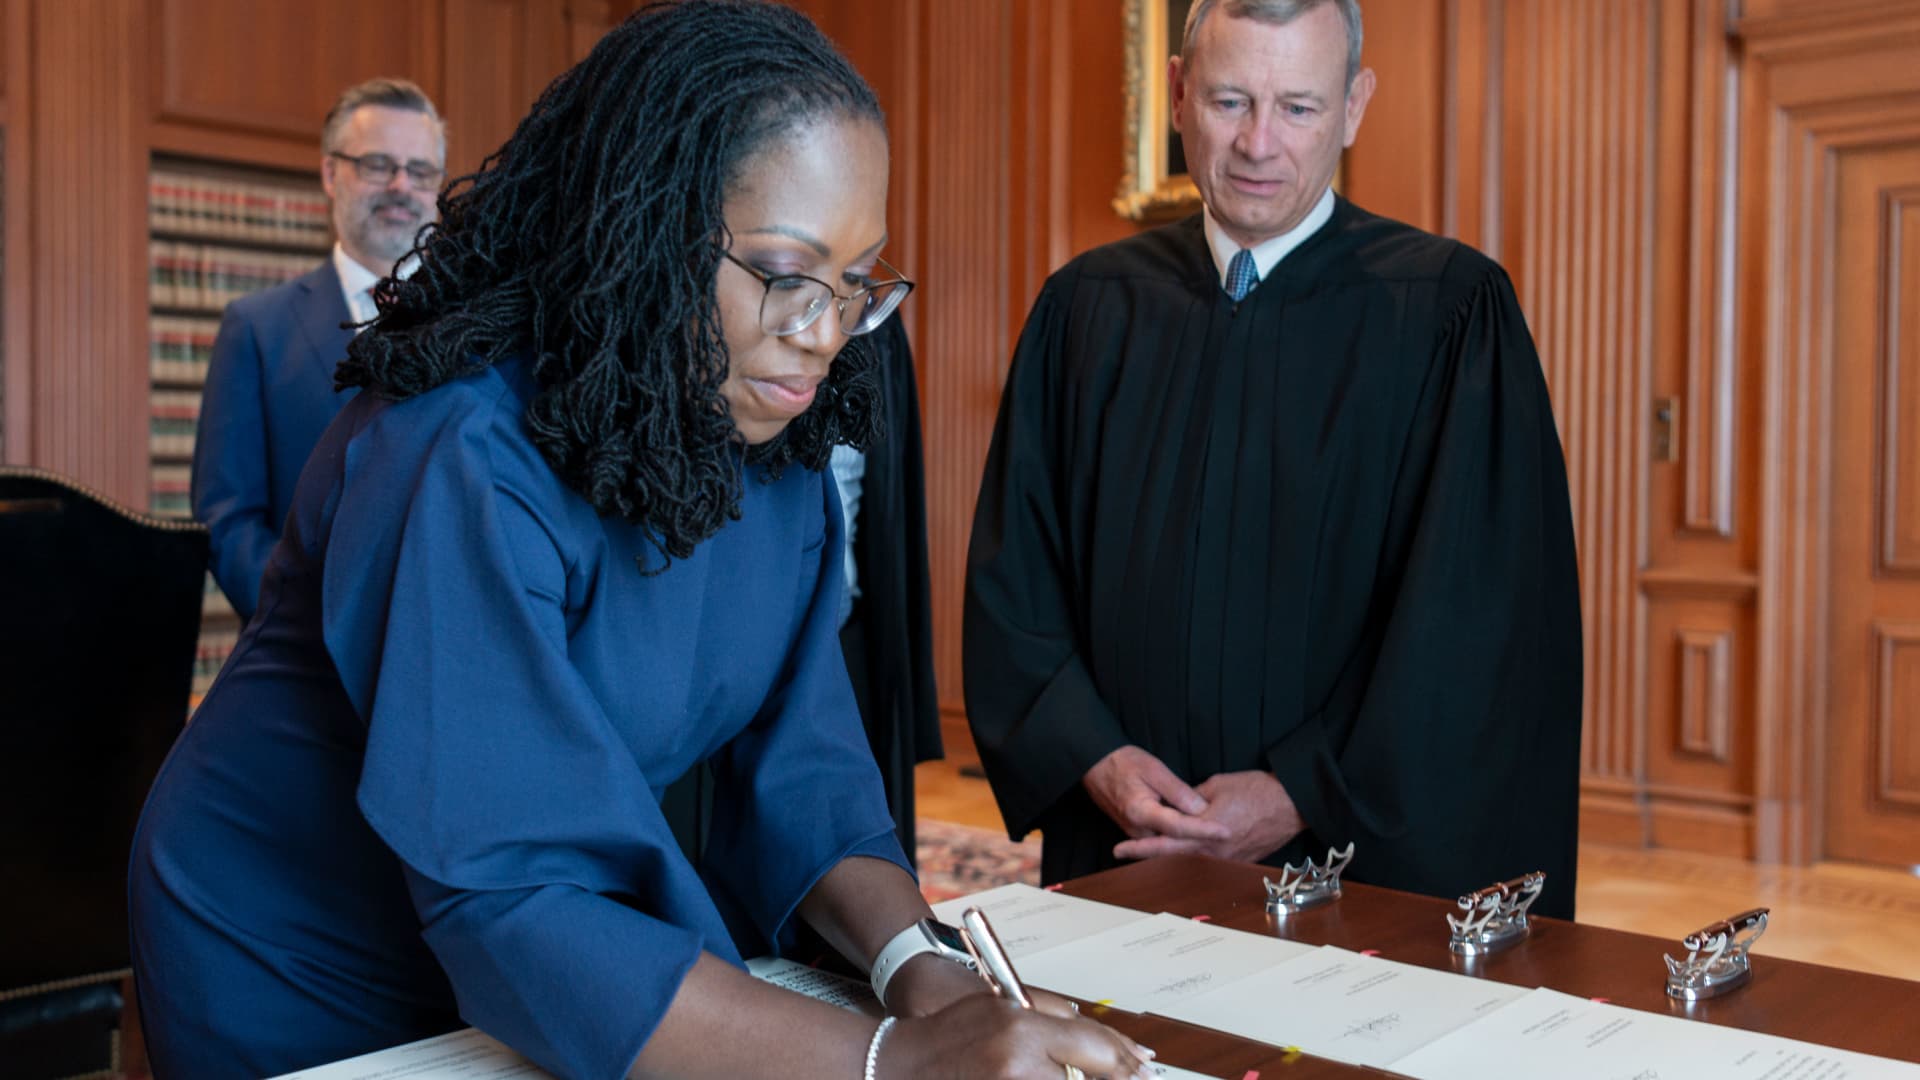 Chief Justice John G. Roberts, Jr., looks on as Justice Ketanji Brown Jackson signs the Oaths of Office in the Justices' Conference Room, Supreme Court Building.